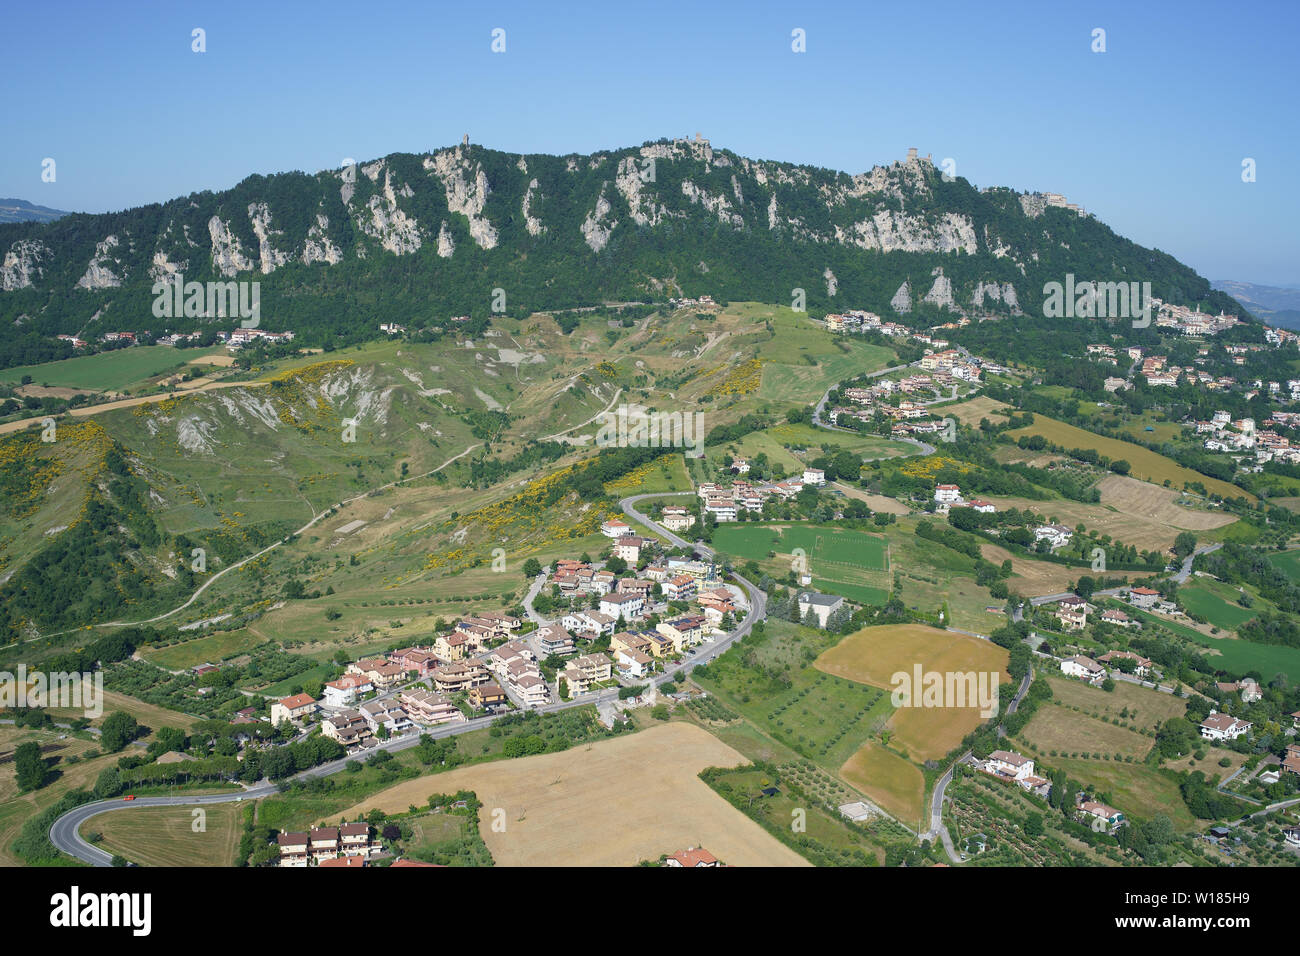 AERIAL VIEW. Mount Titano (elevation: 749m, highest point in the country) overlooking a landscape of farmlands and villages. Republic of San Marino. Stock Photo